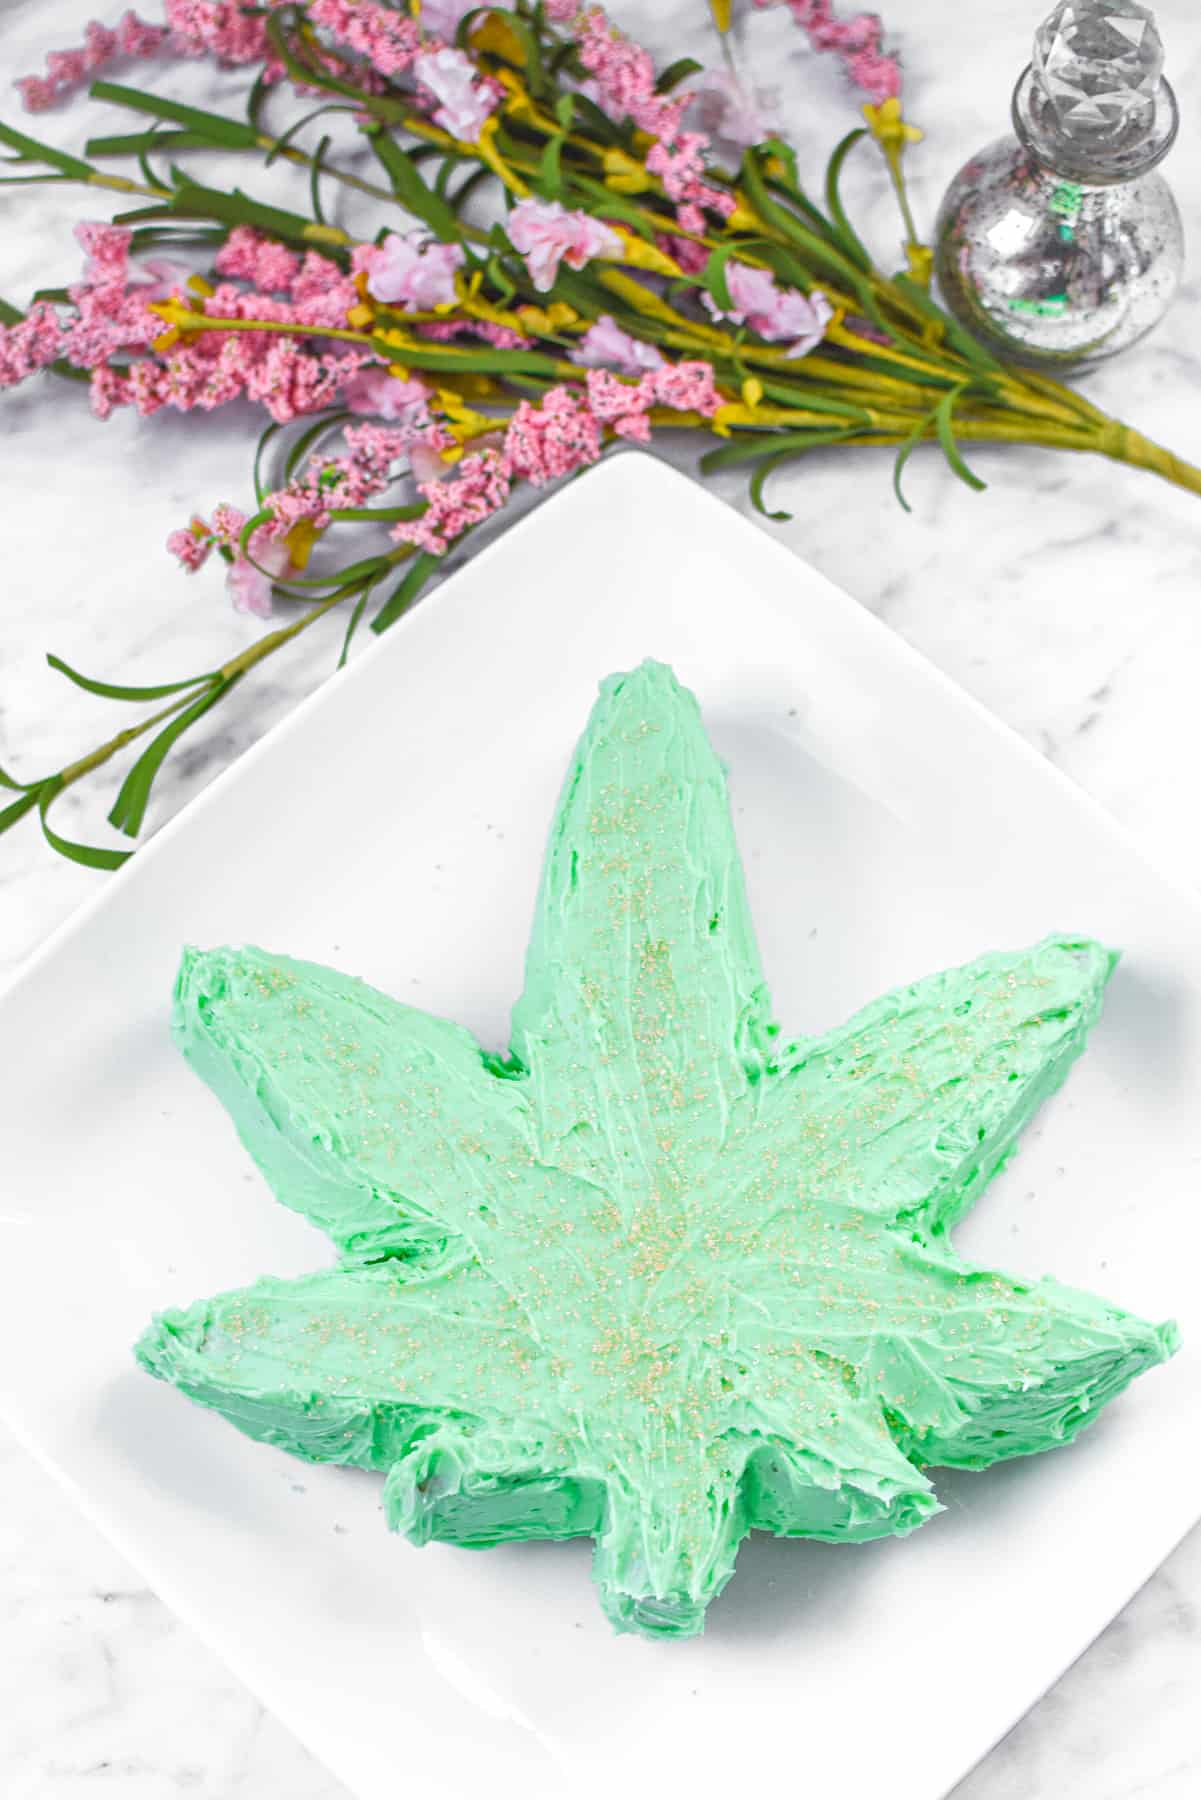 A white countertop with a white plate with a green cannabis cake on top.